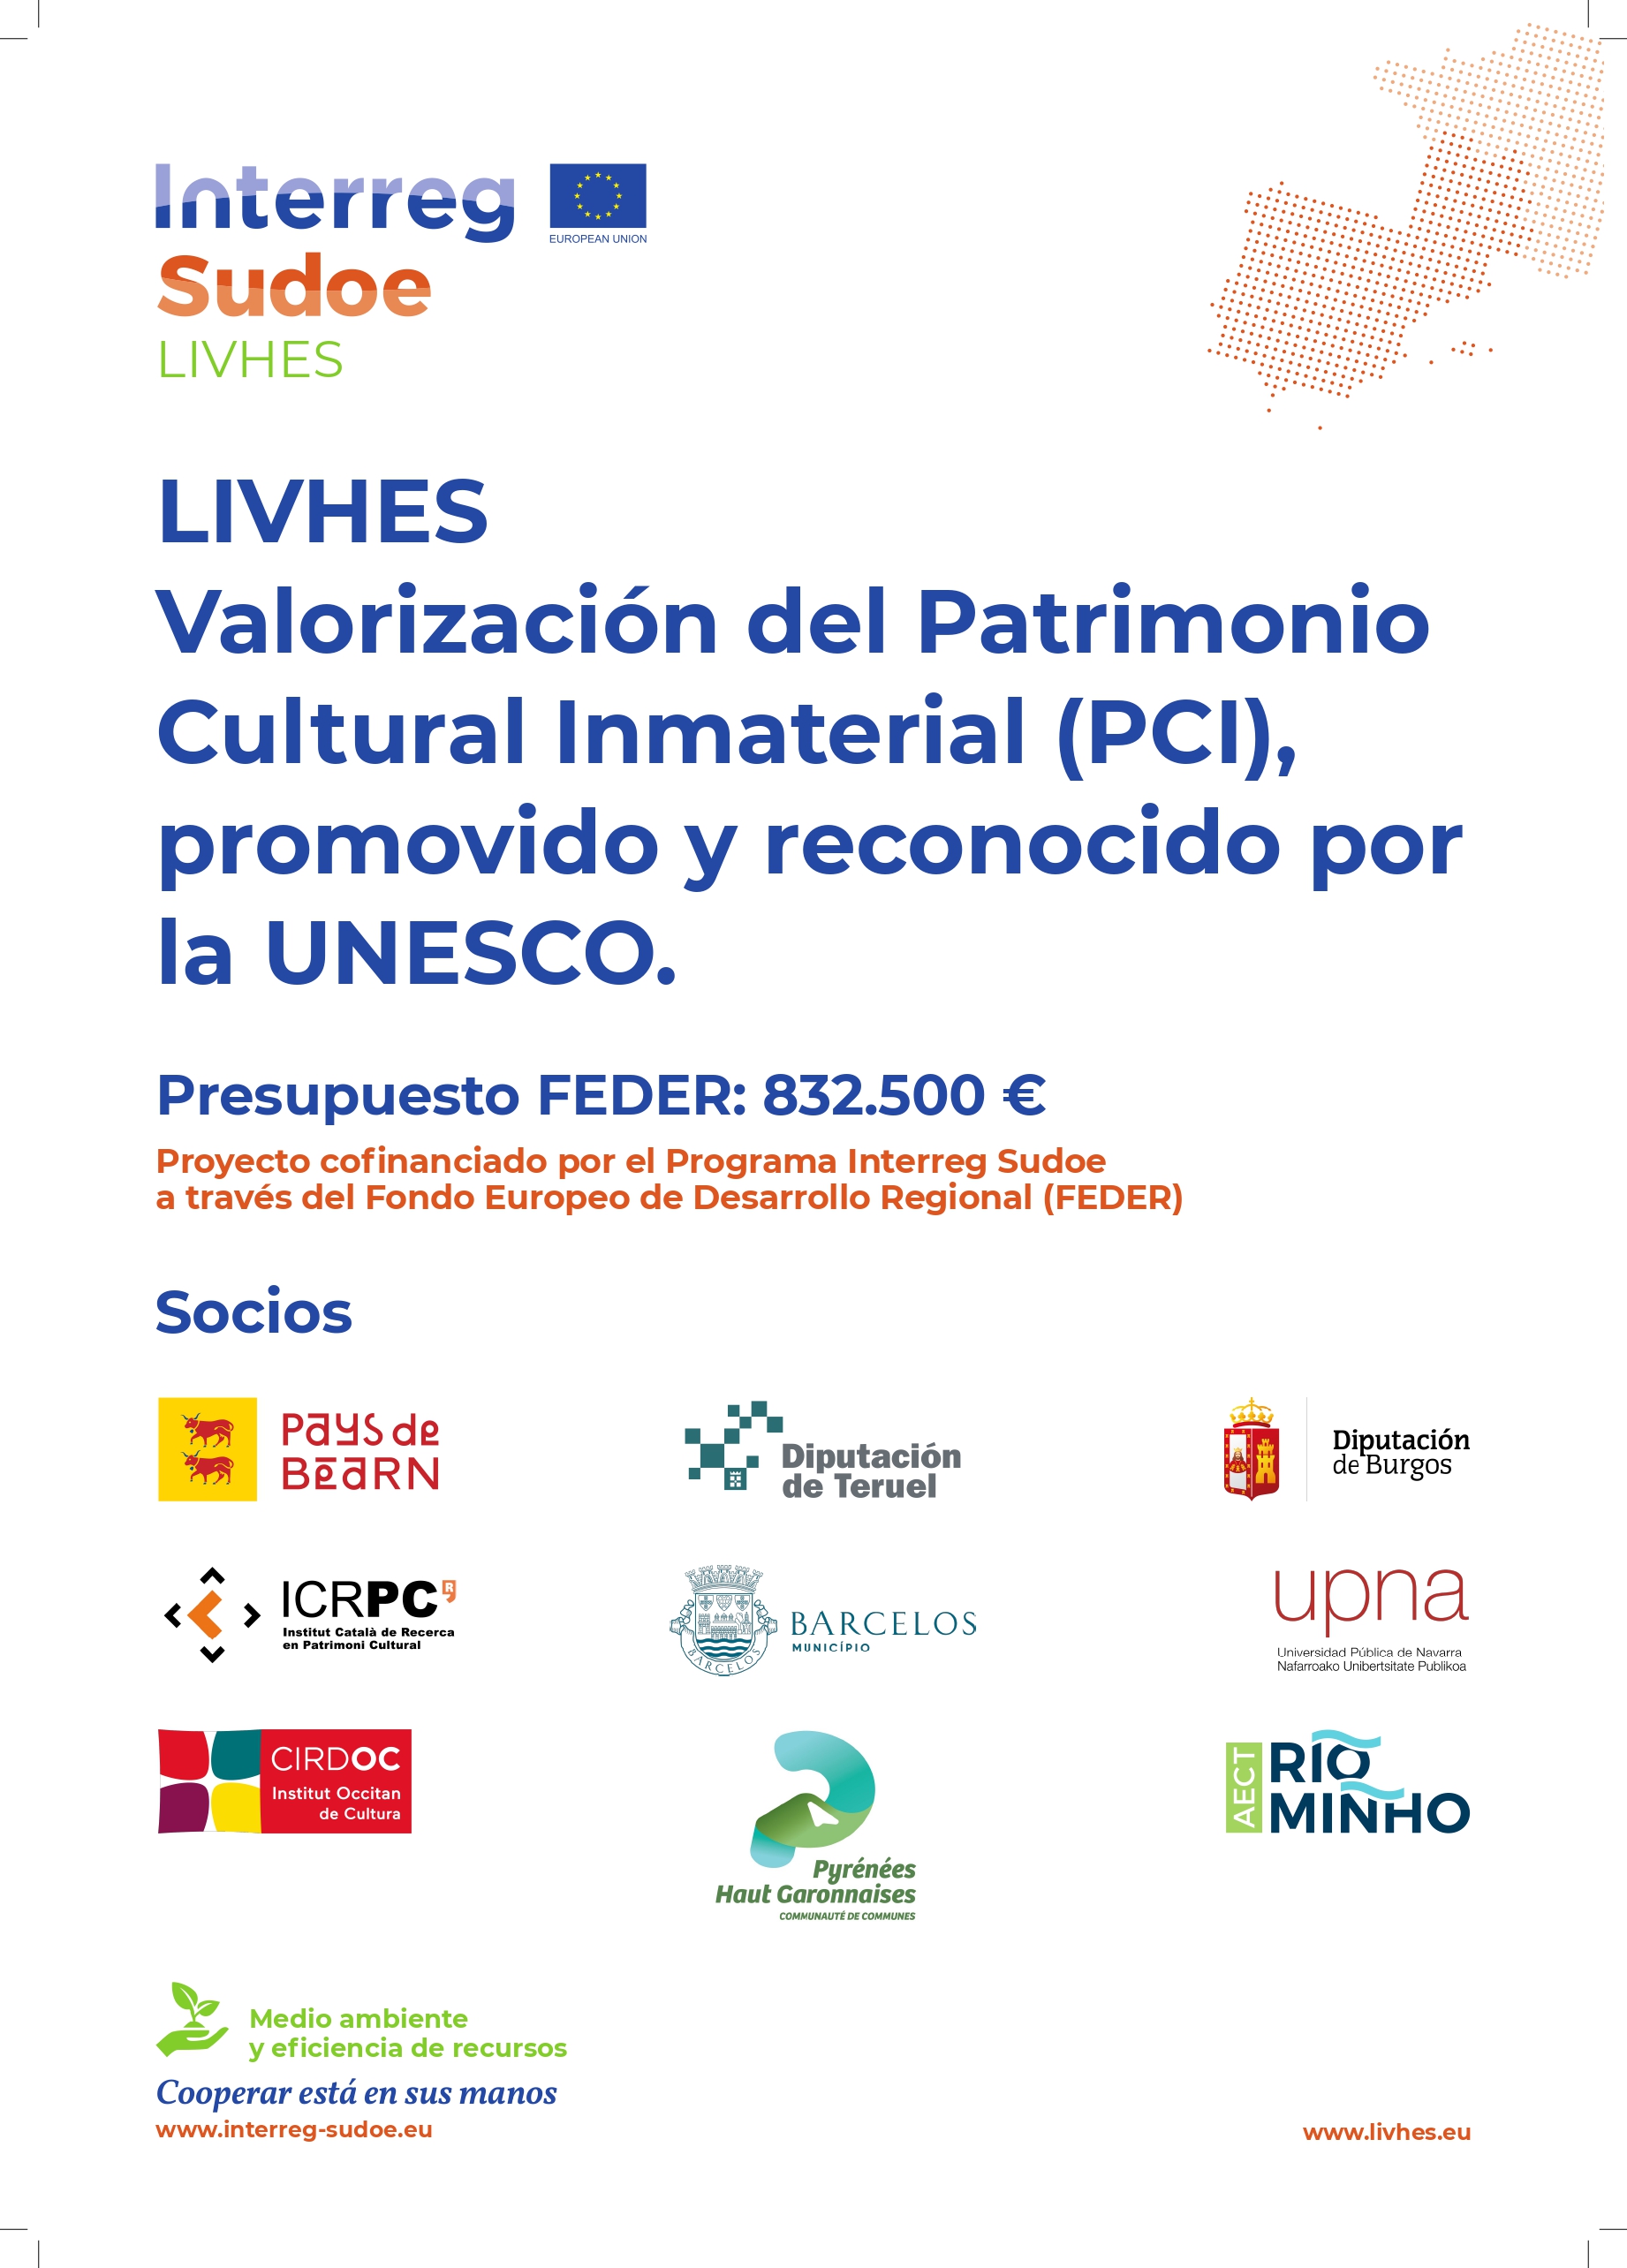 LIVHES. Living heritage for sustainable development